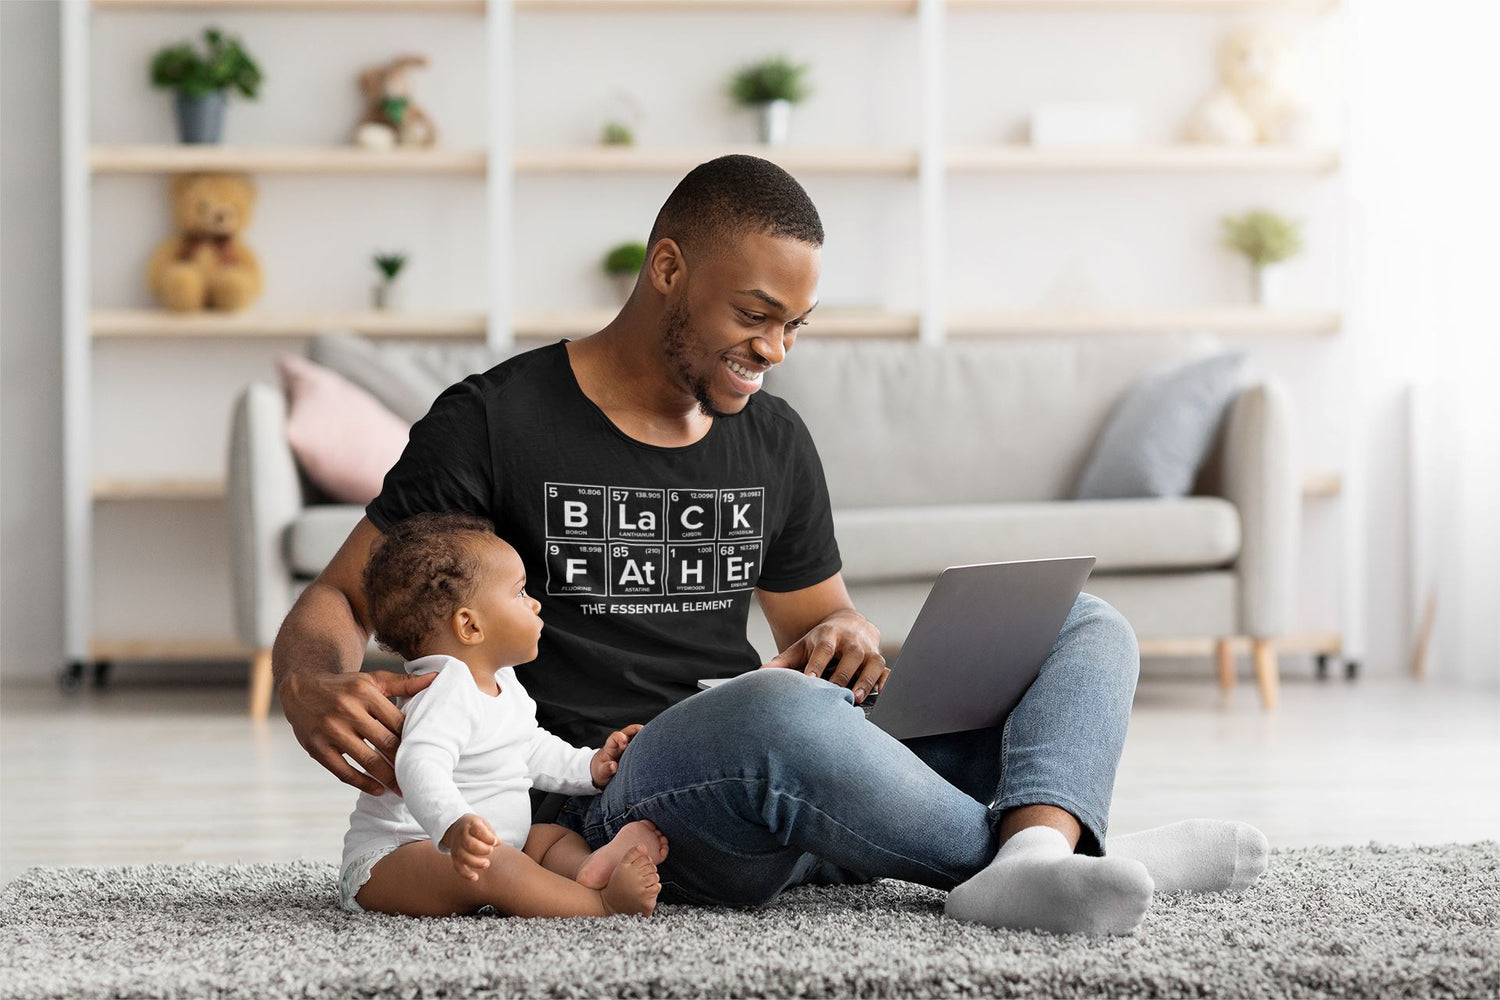 Black Father, The Essential Element, Periodic Table T-Shirt B1ack By Design LLC 